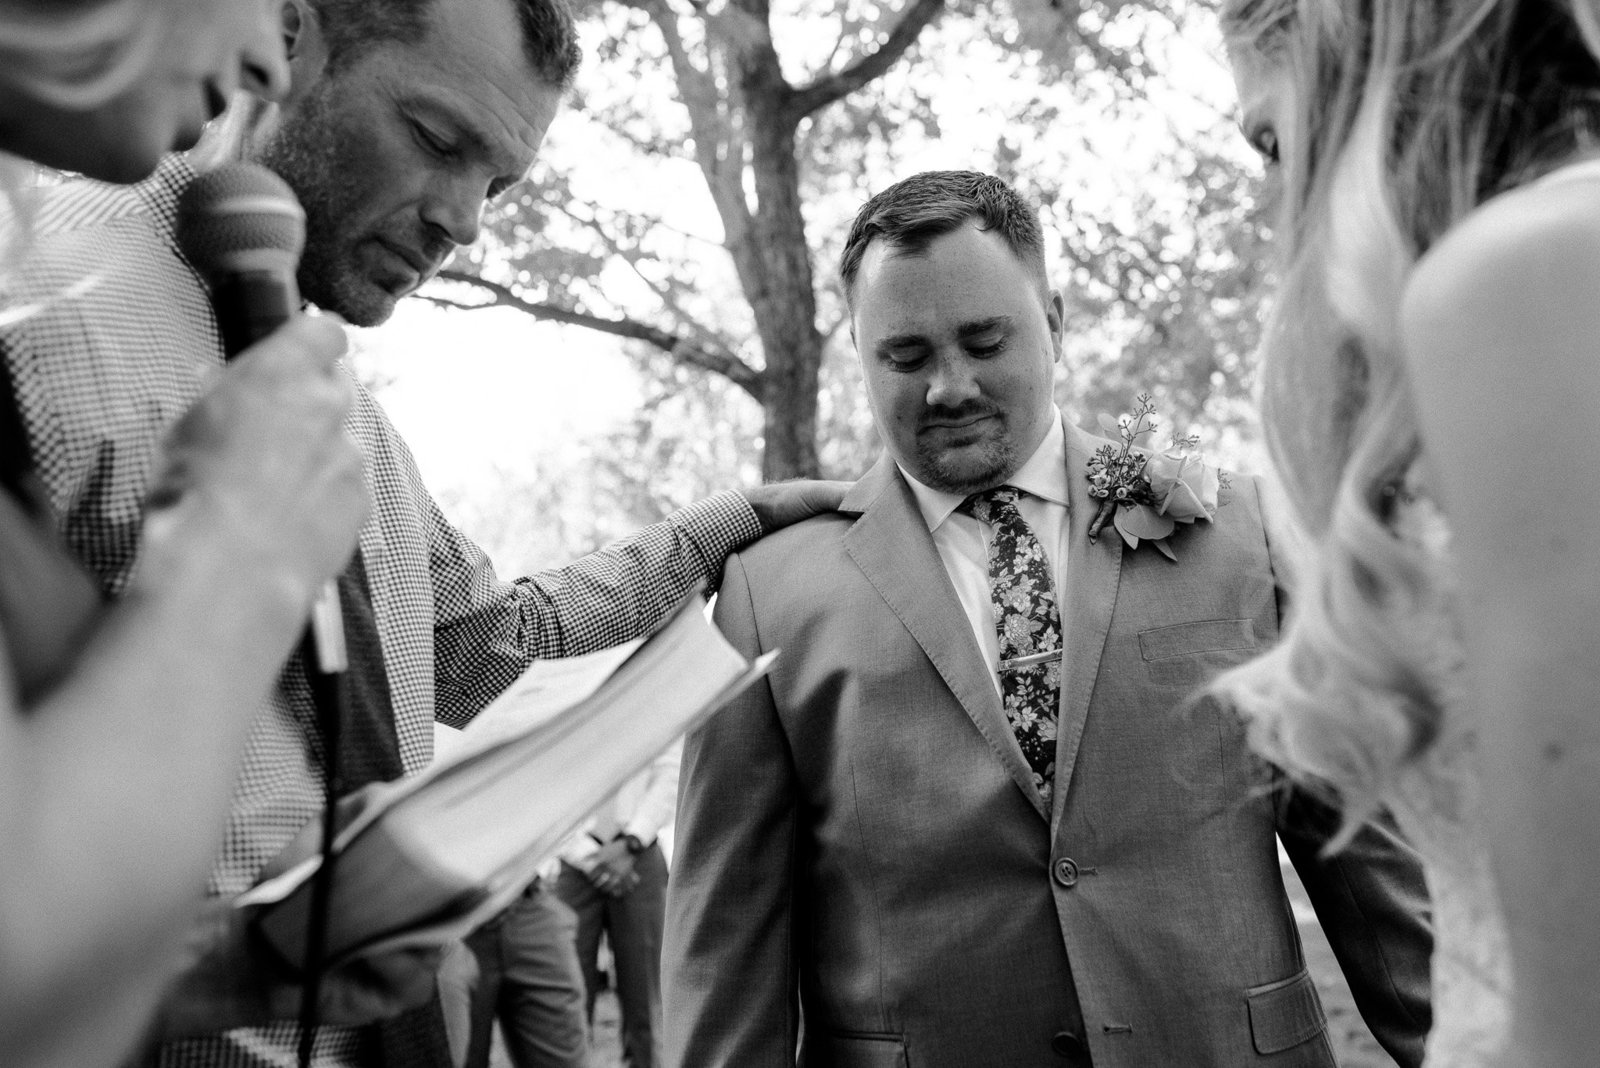 Block one events wedding photographer in old town fort collins. Black adn white of groom praying with groomsmen.